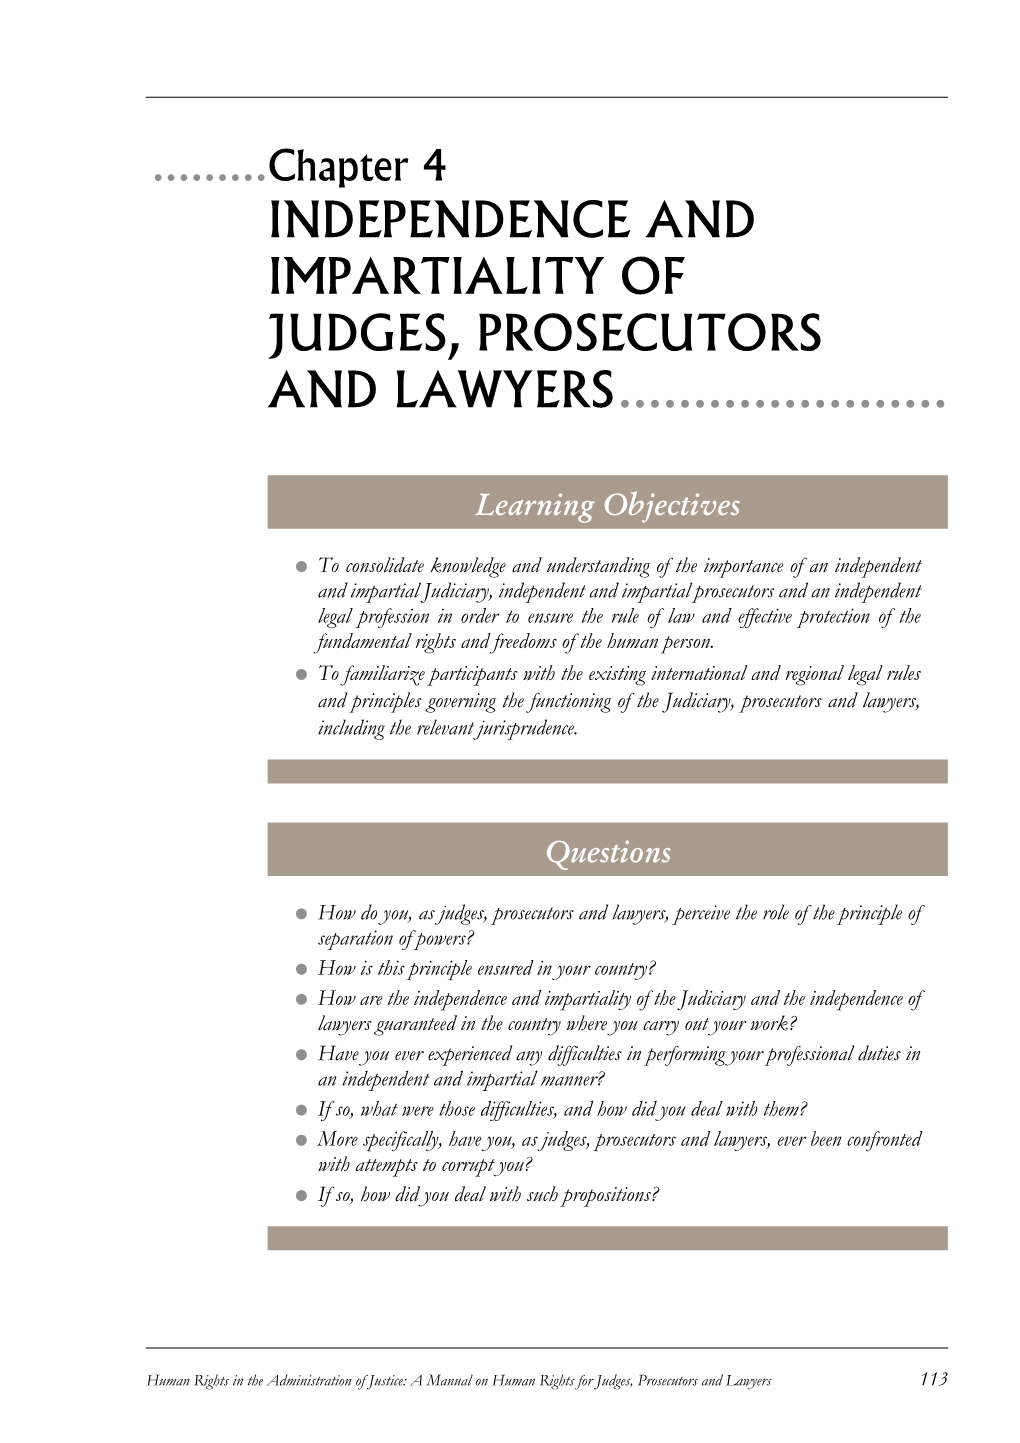 Chapter 4 • Independence and Impartiality of Judges, Prosecutors and Lawyers